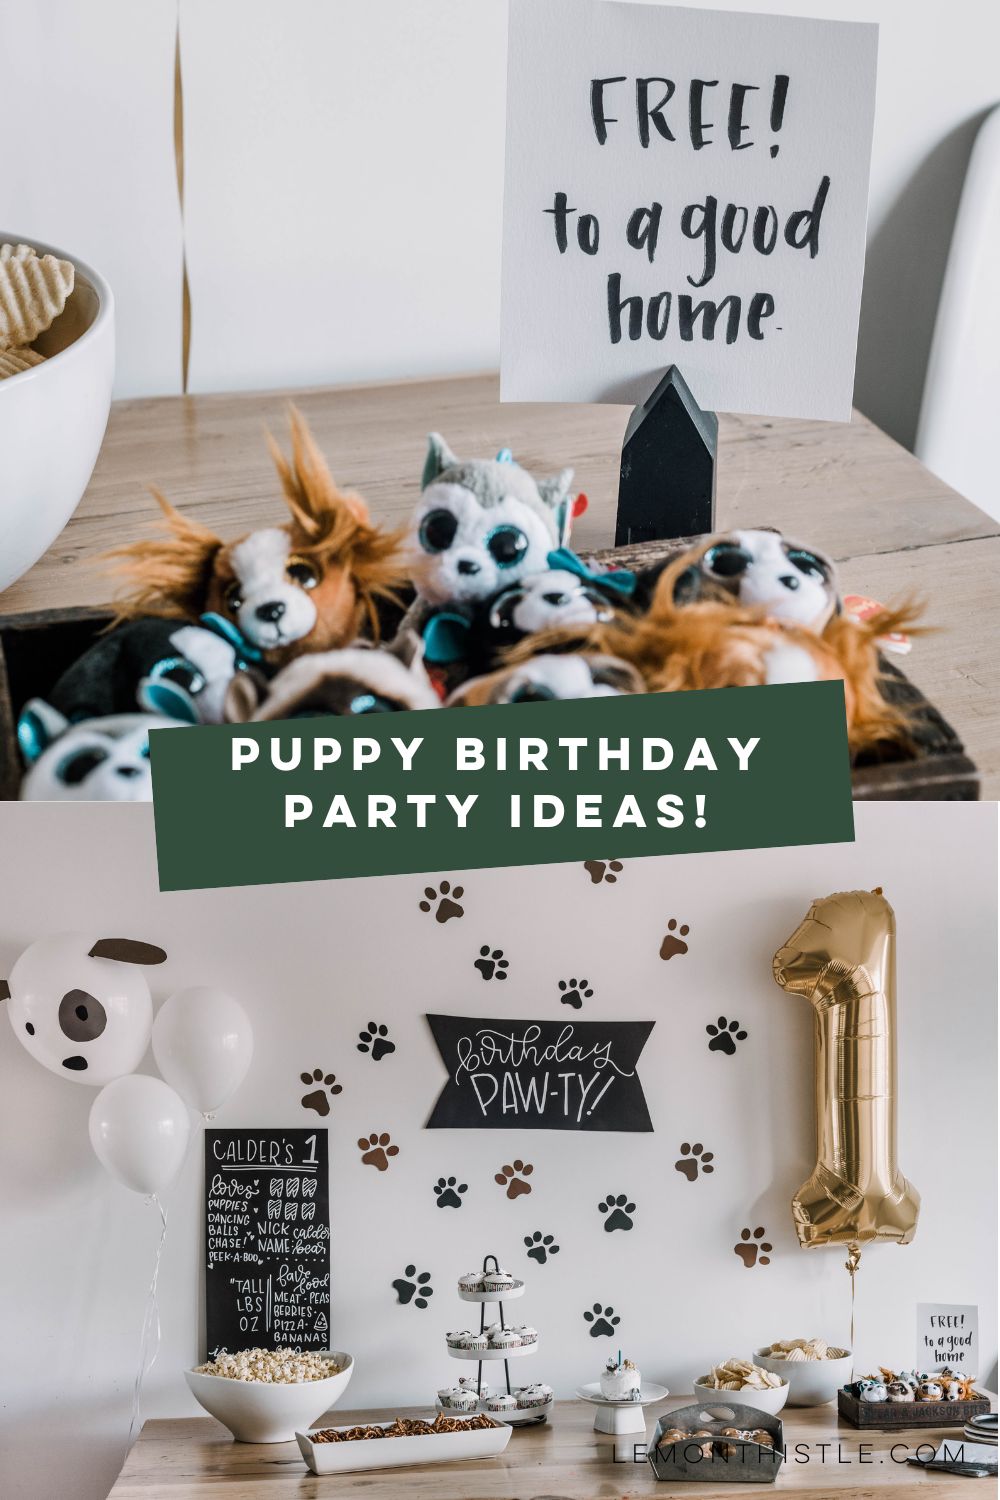 compilation image with text over: Puppy birthday party ideas!
image of tiny stuffed animals with 'free to a good home' sign and full party table setup with paw prints on wall and 'puppy paw-ty' sign